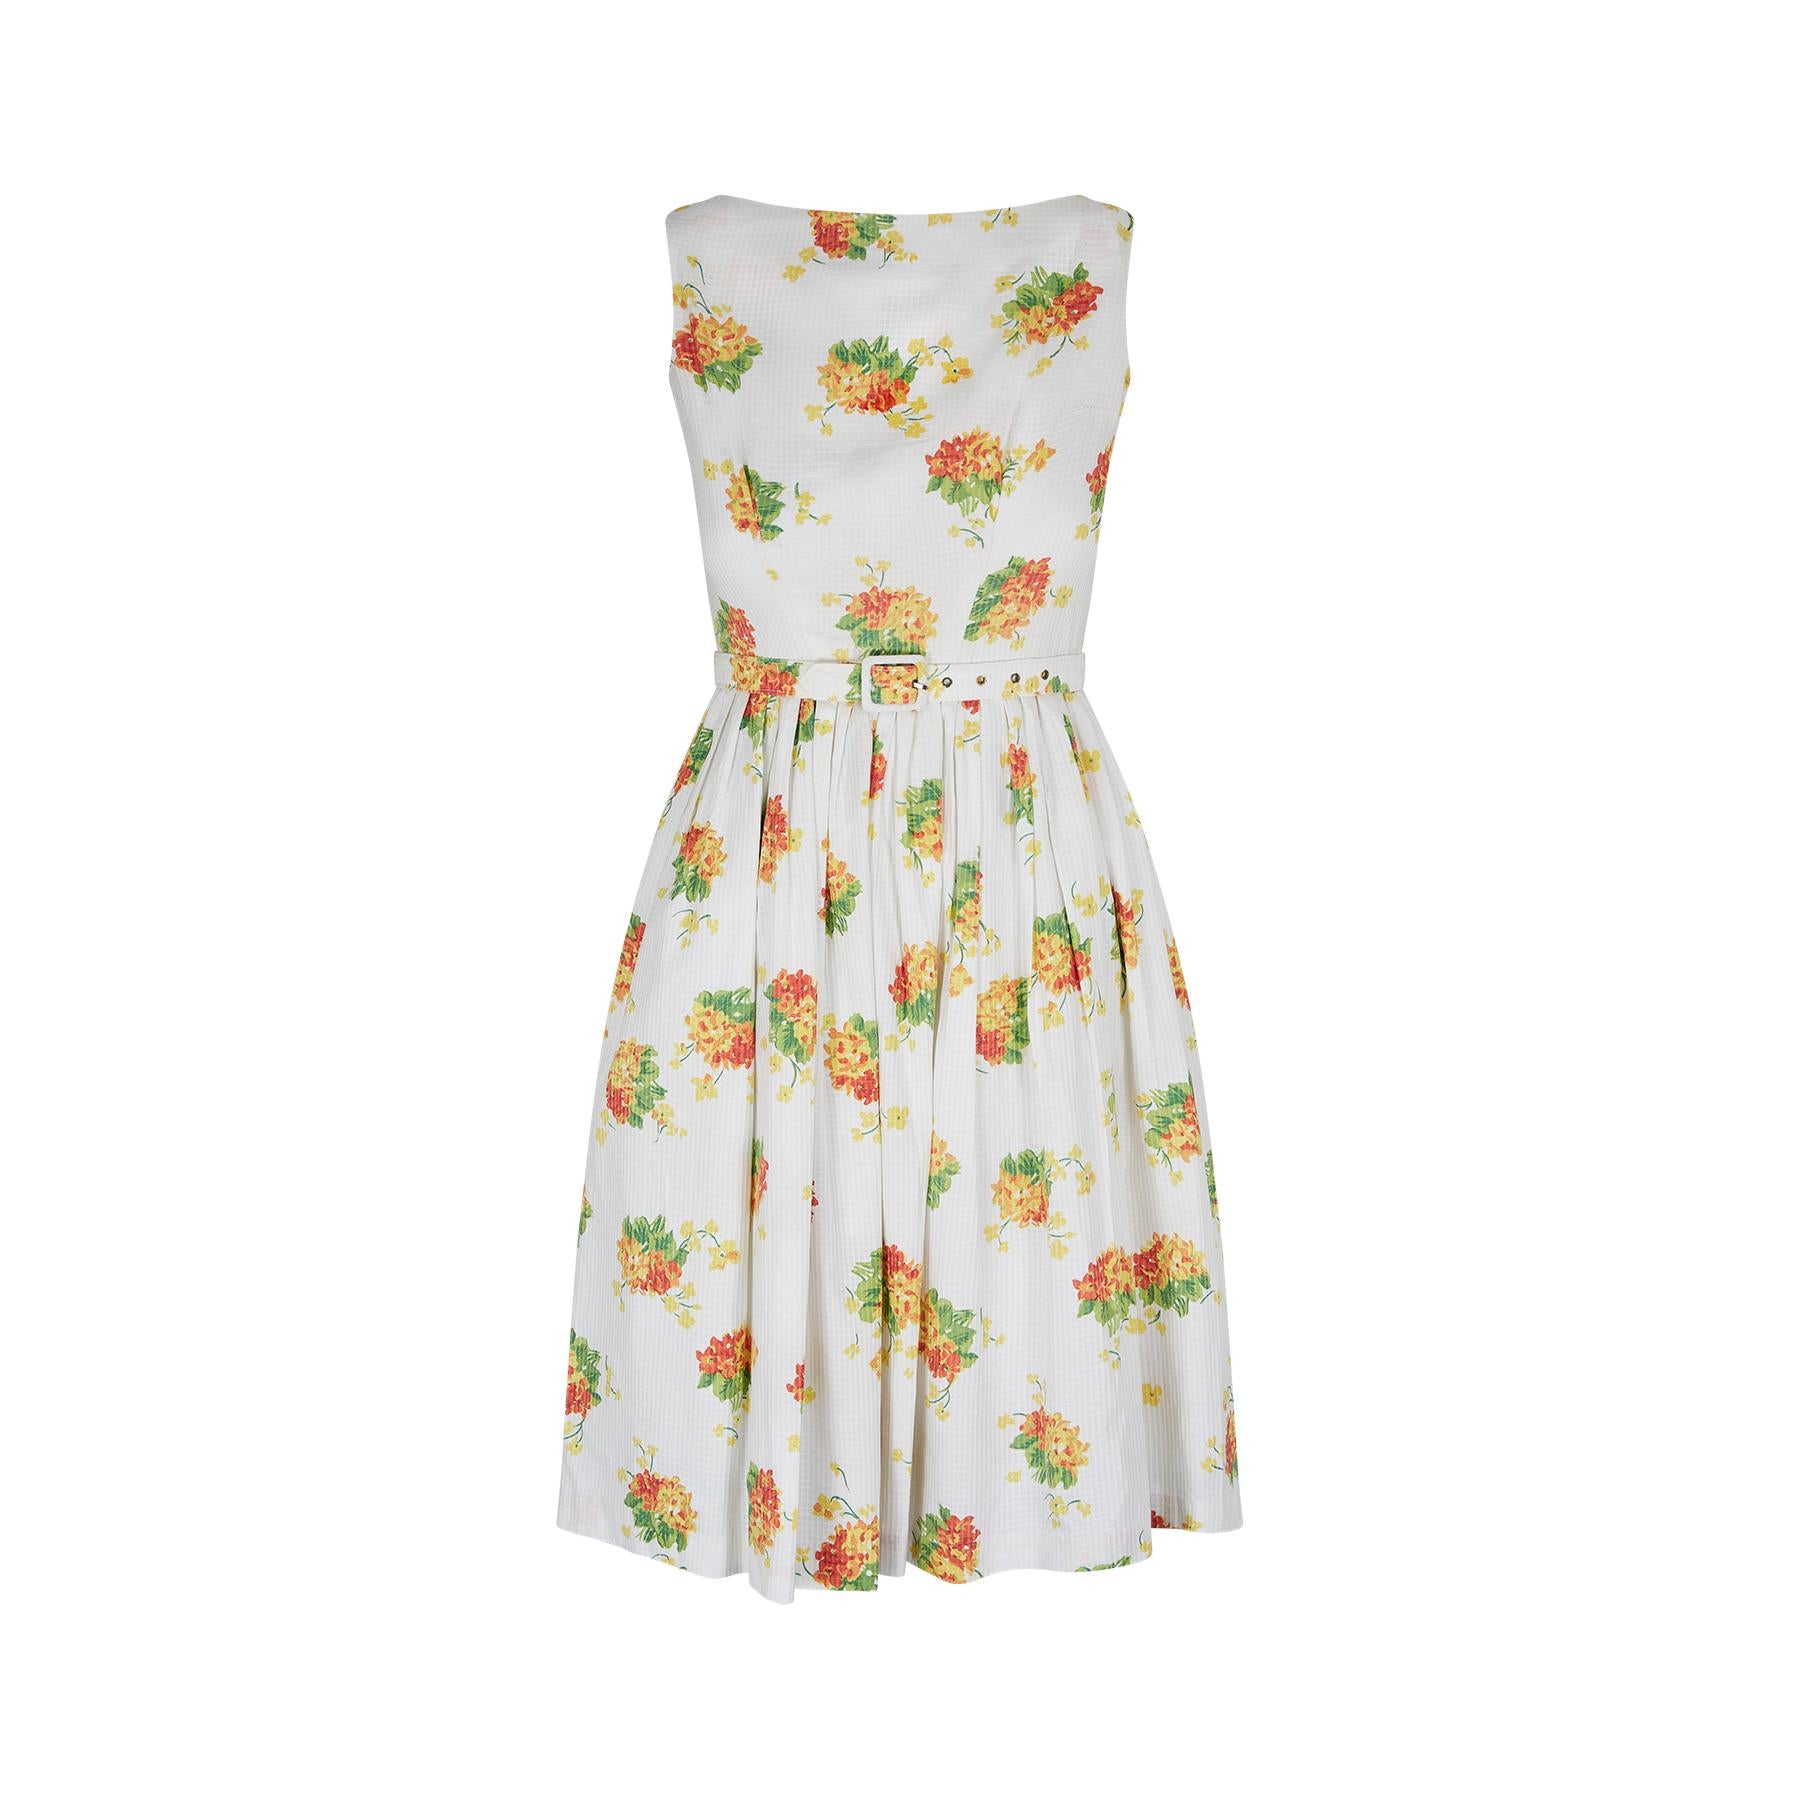 Original early 1960s fit and flare dress by high quality British label, Rhona Roy. The dress features a repeat floral spray print in shades of red, orange, yellow and green. It is a fine quality waffle cotton fabric. The dress is sleeveless with a